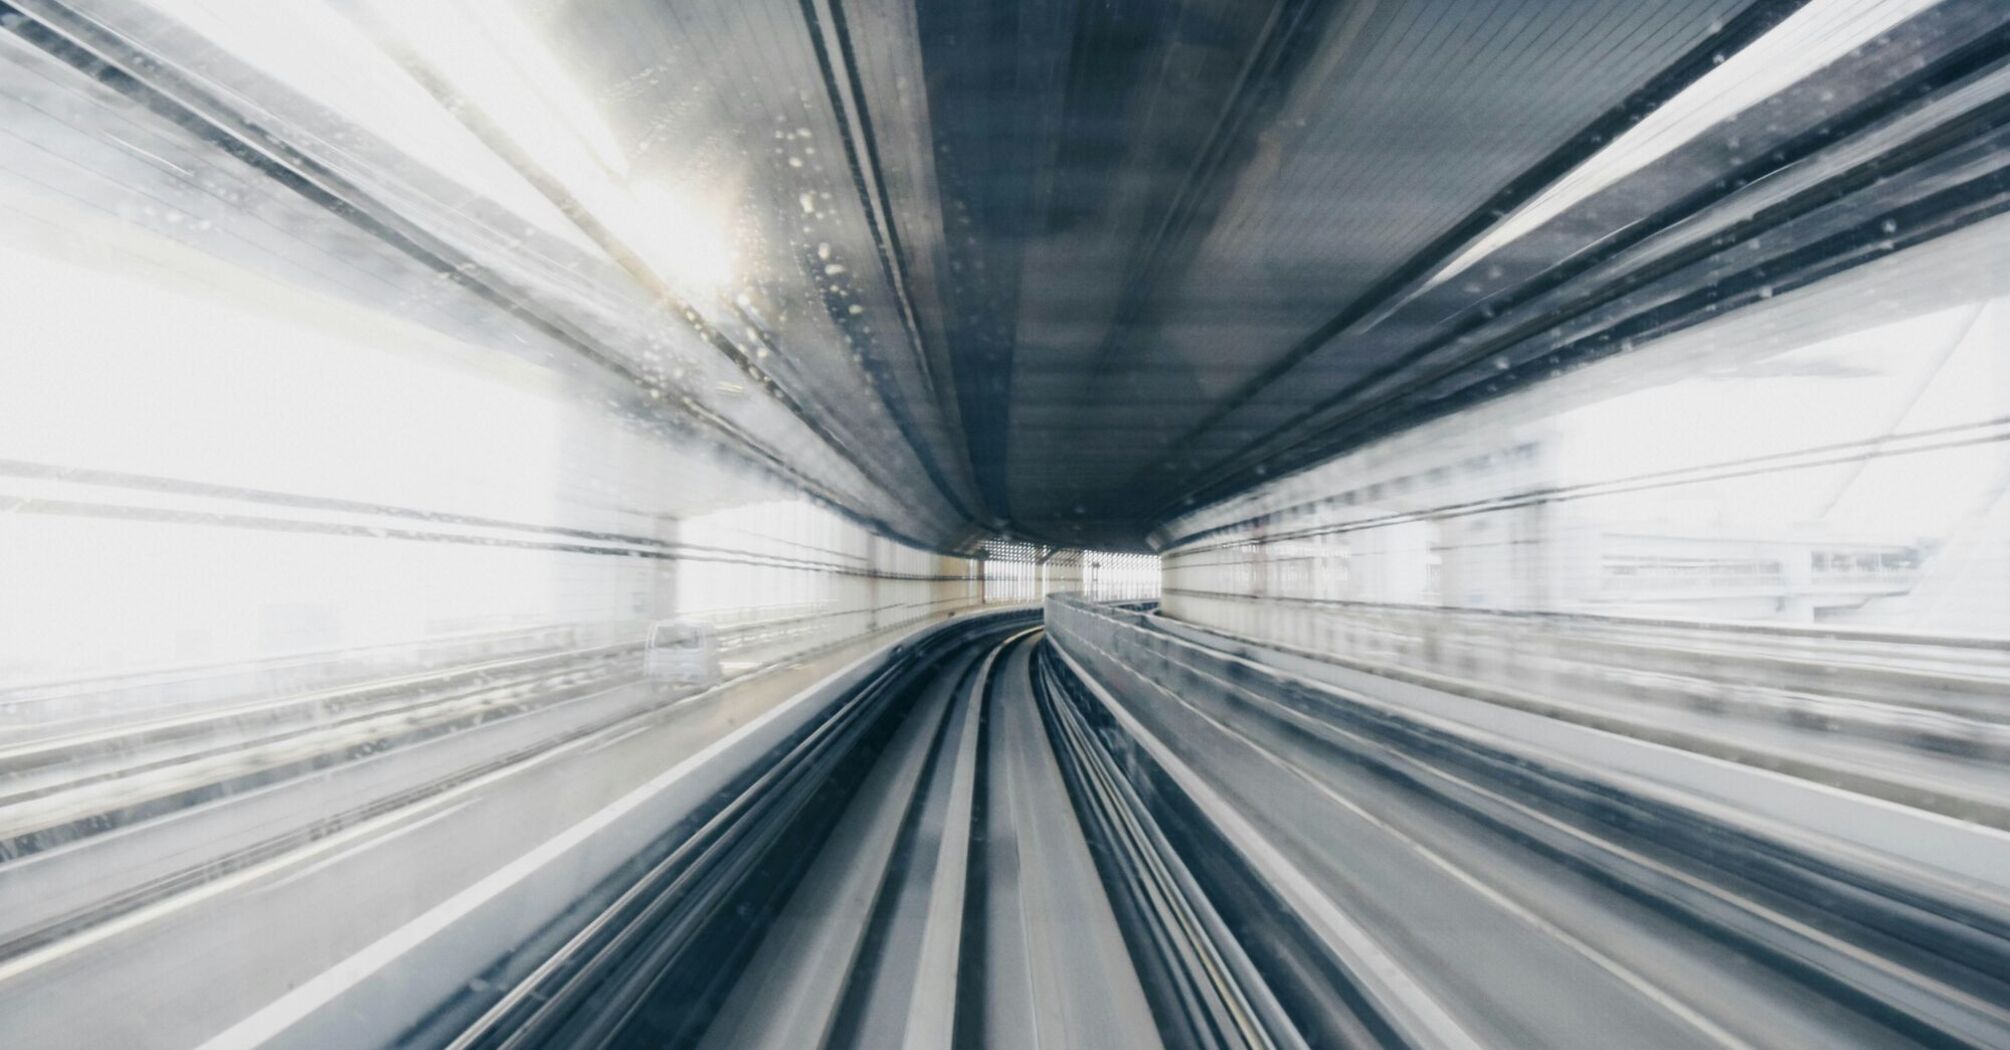 A motion-blurred photograph of a train's perspective traveling at high speed through a tunnel